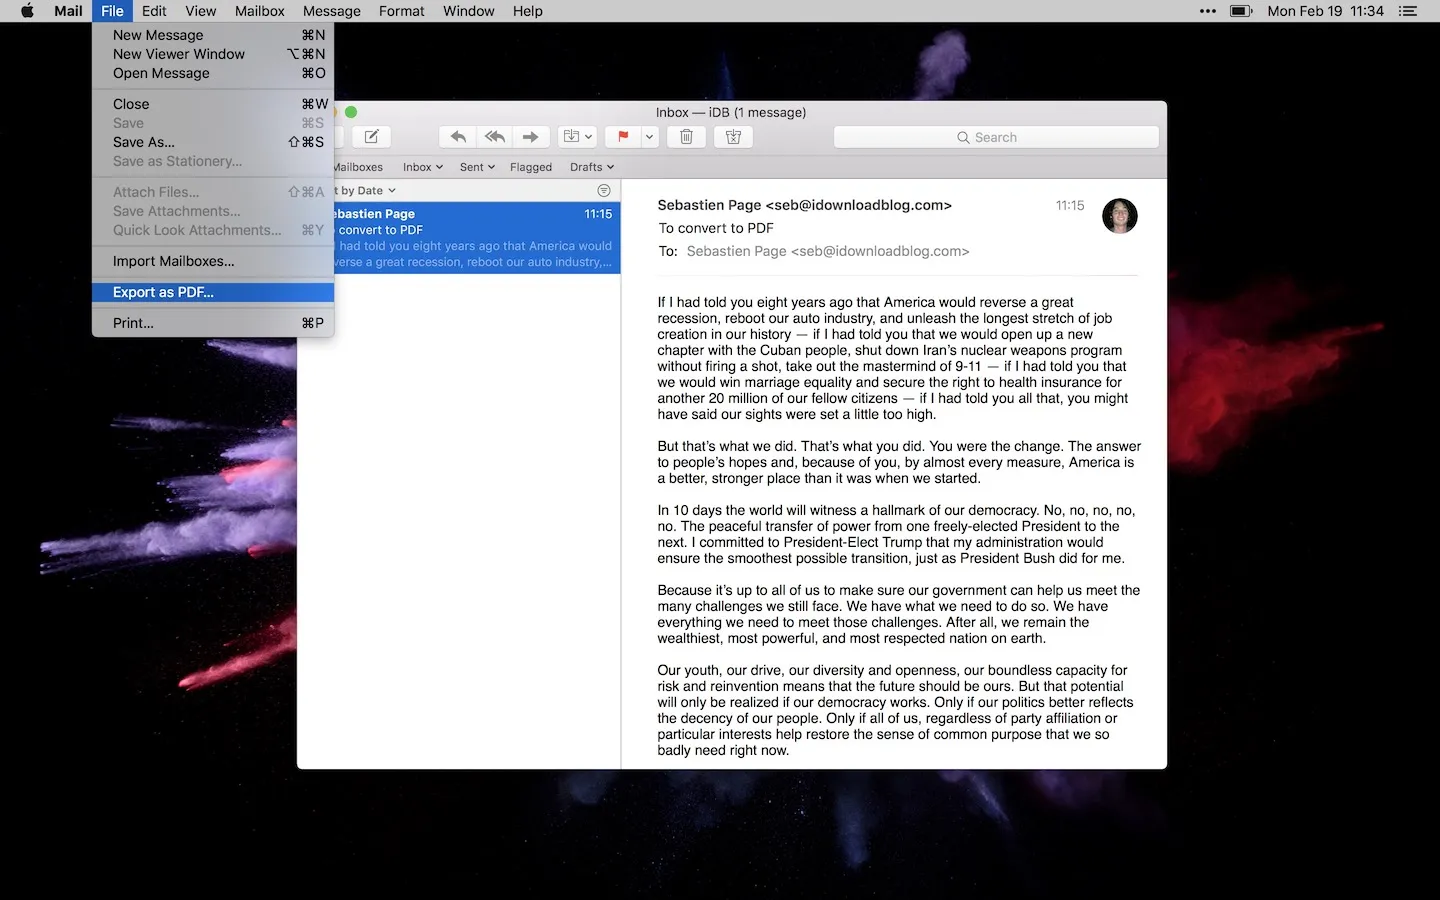 how to save an email as a PDF apple mail